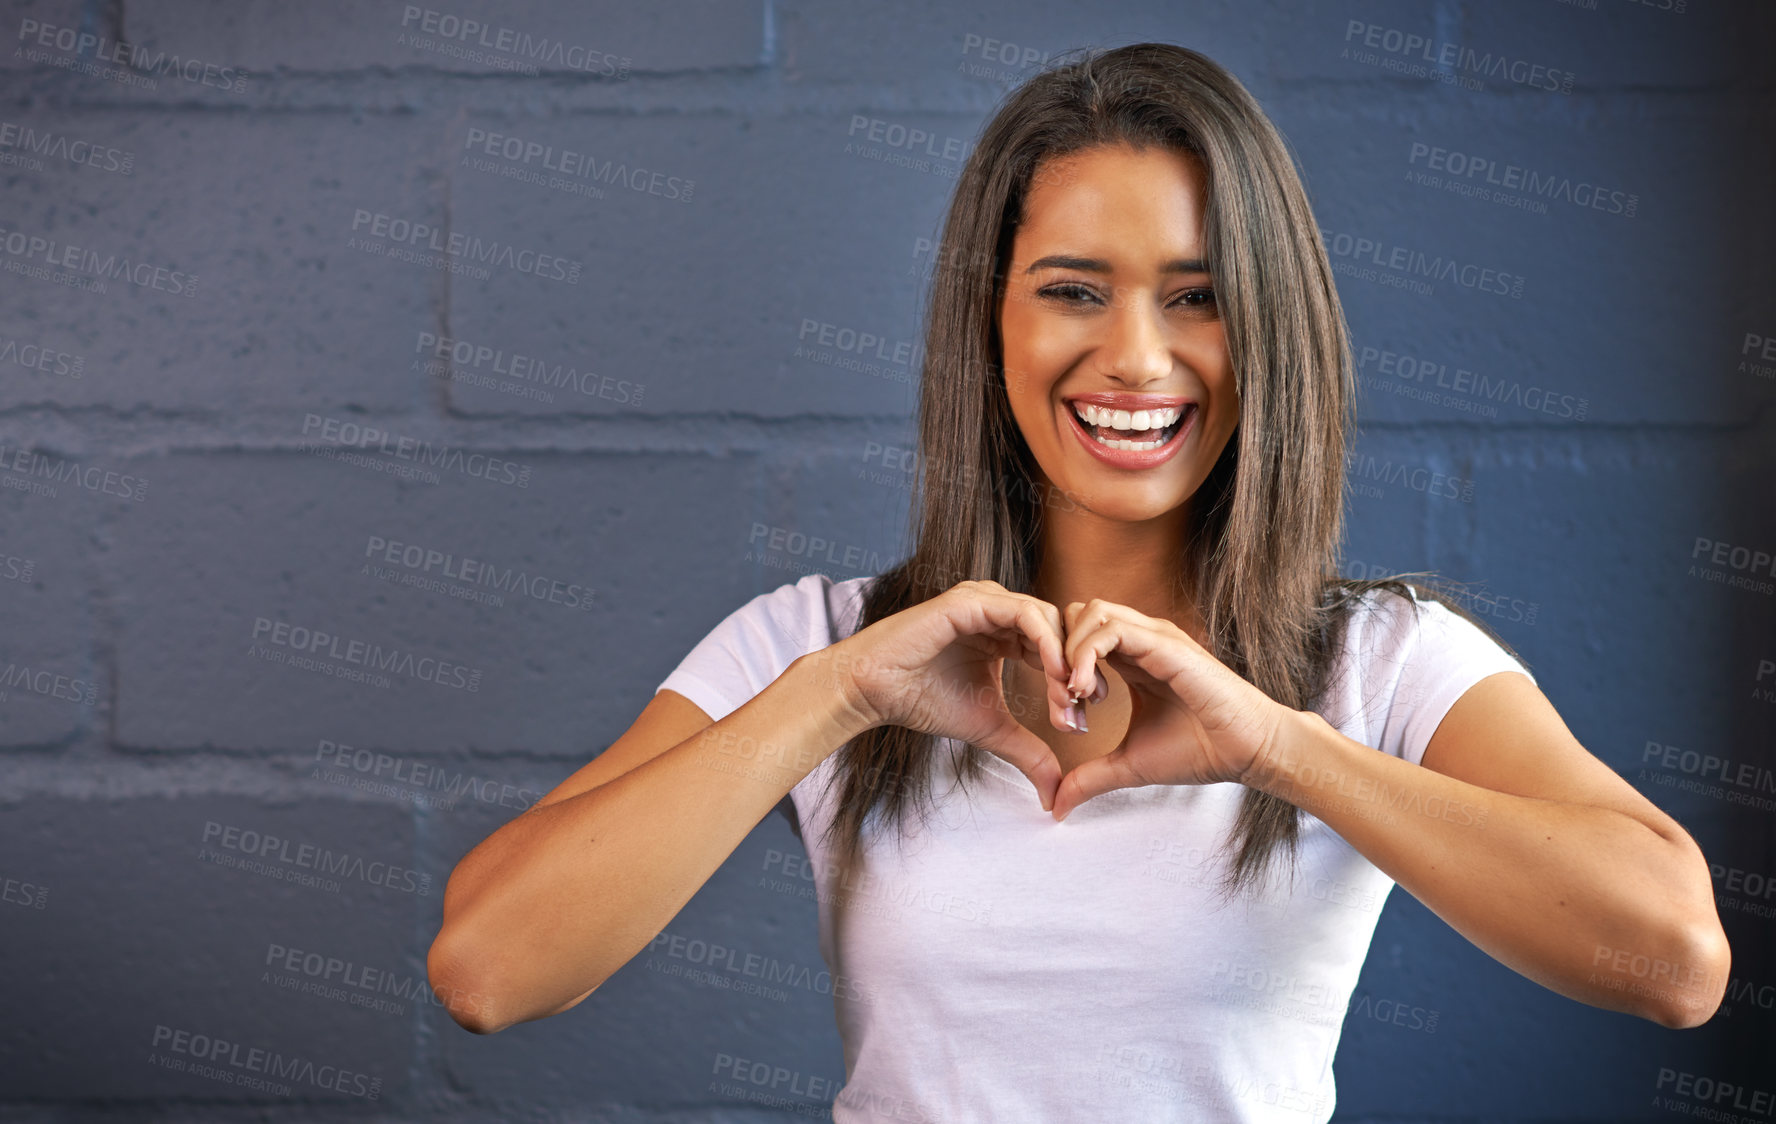 Buy stock photo Portrait of a young woman making a heart gesture with her hands against a brick wall background